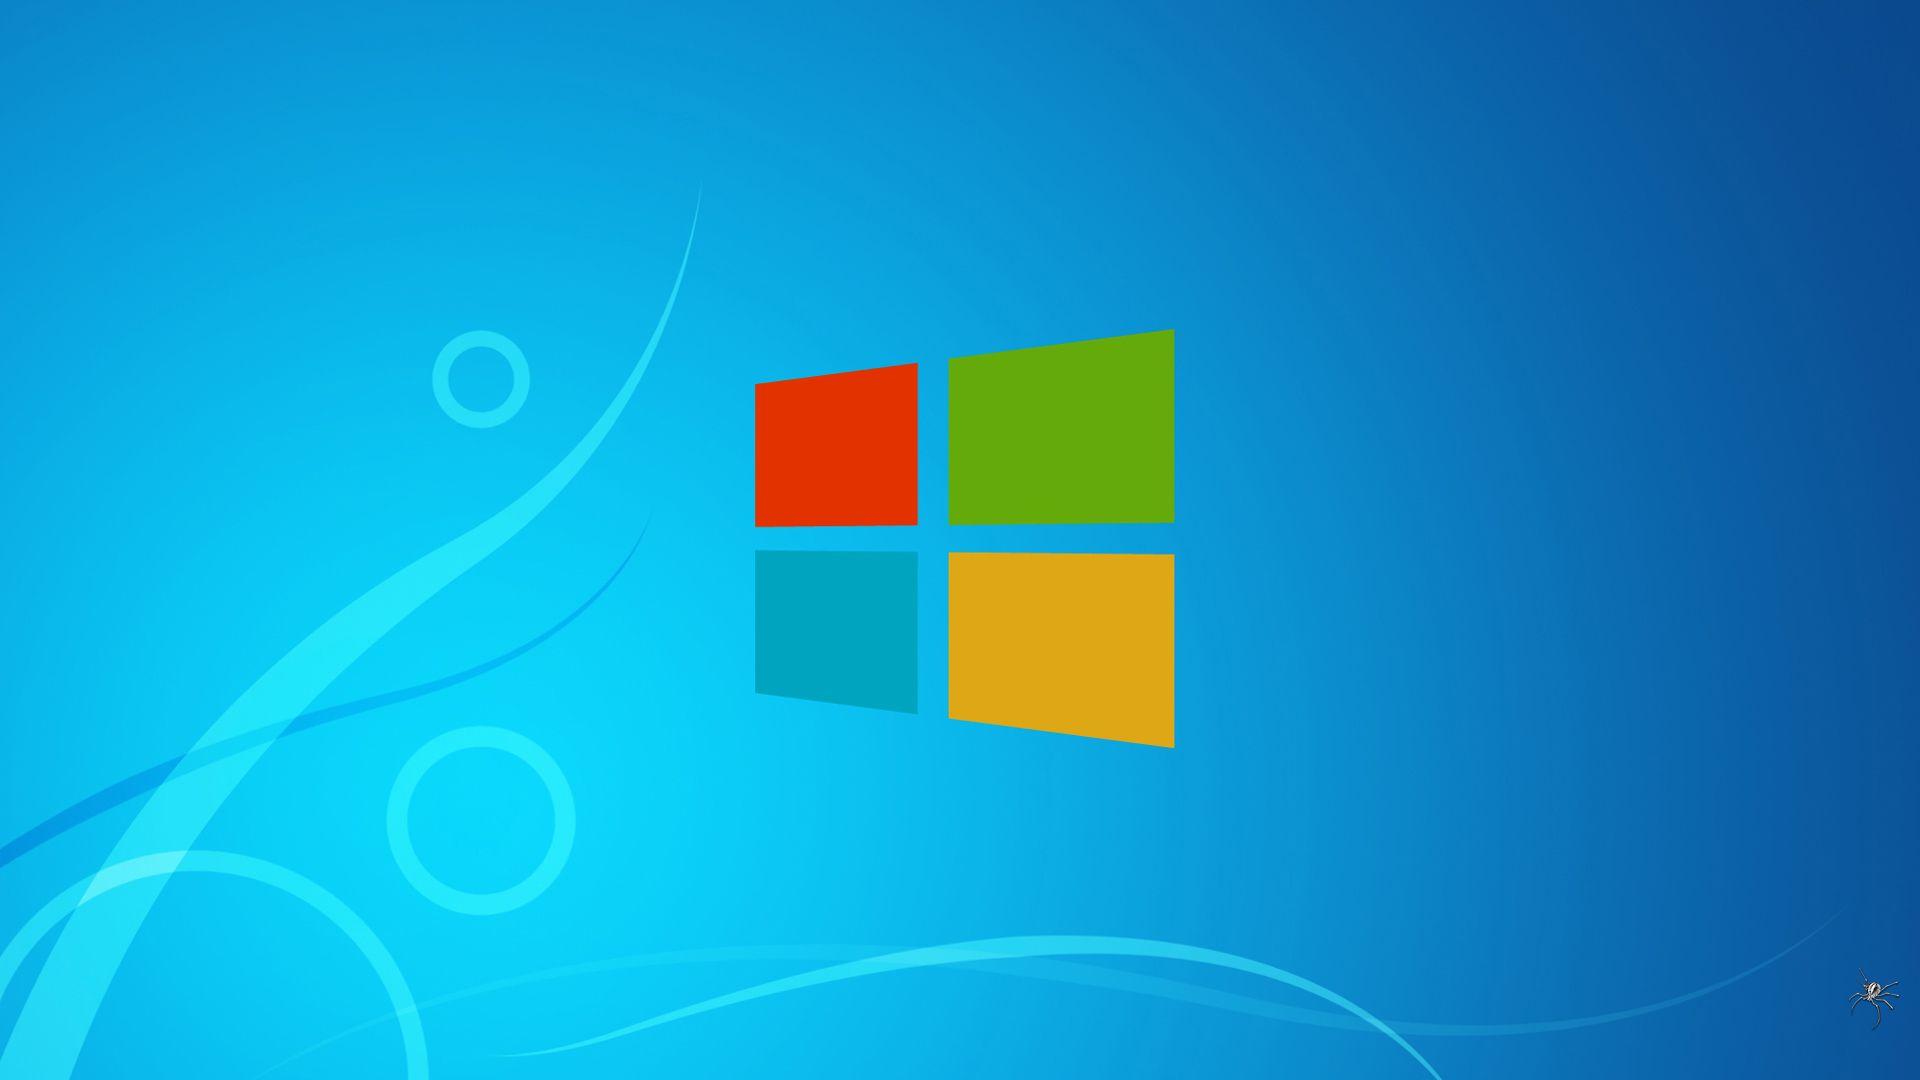 Hd Wallpaper For Windows 8 1920x Picture